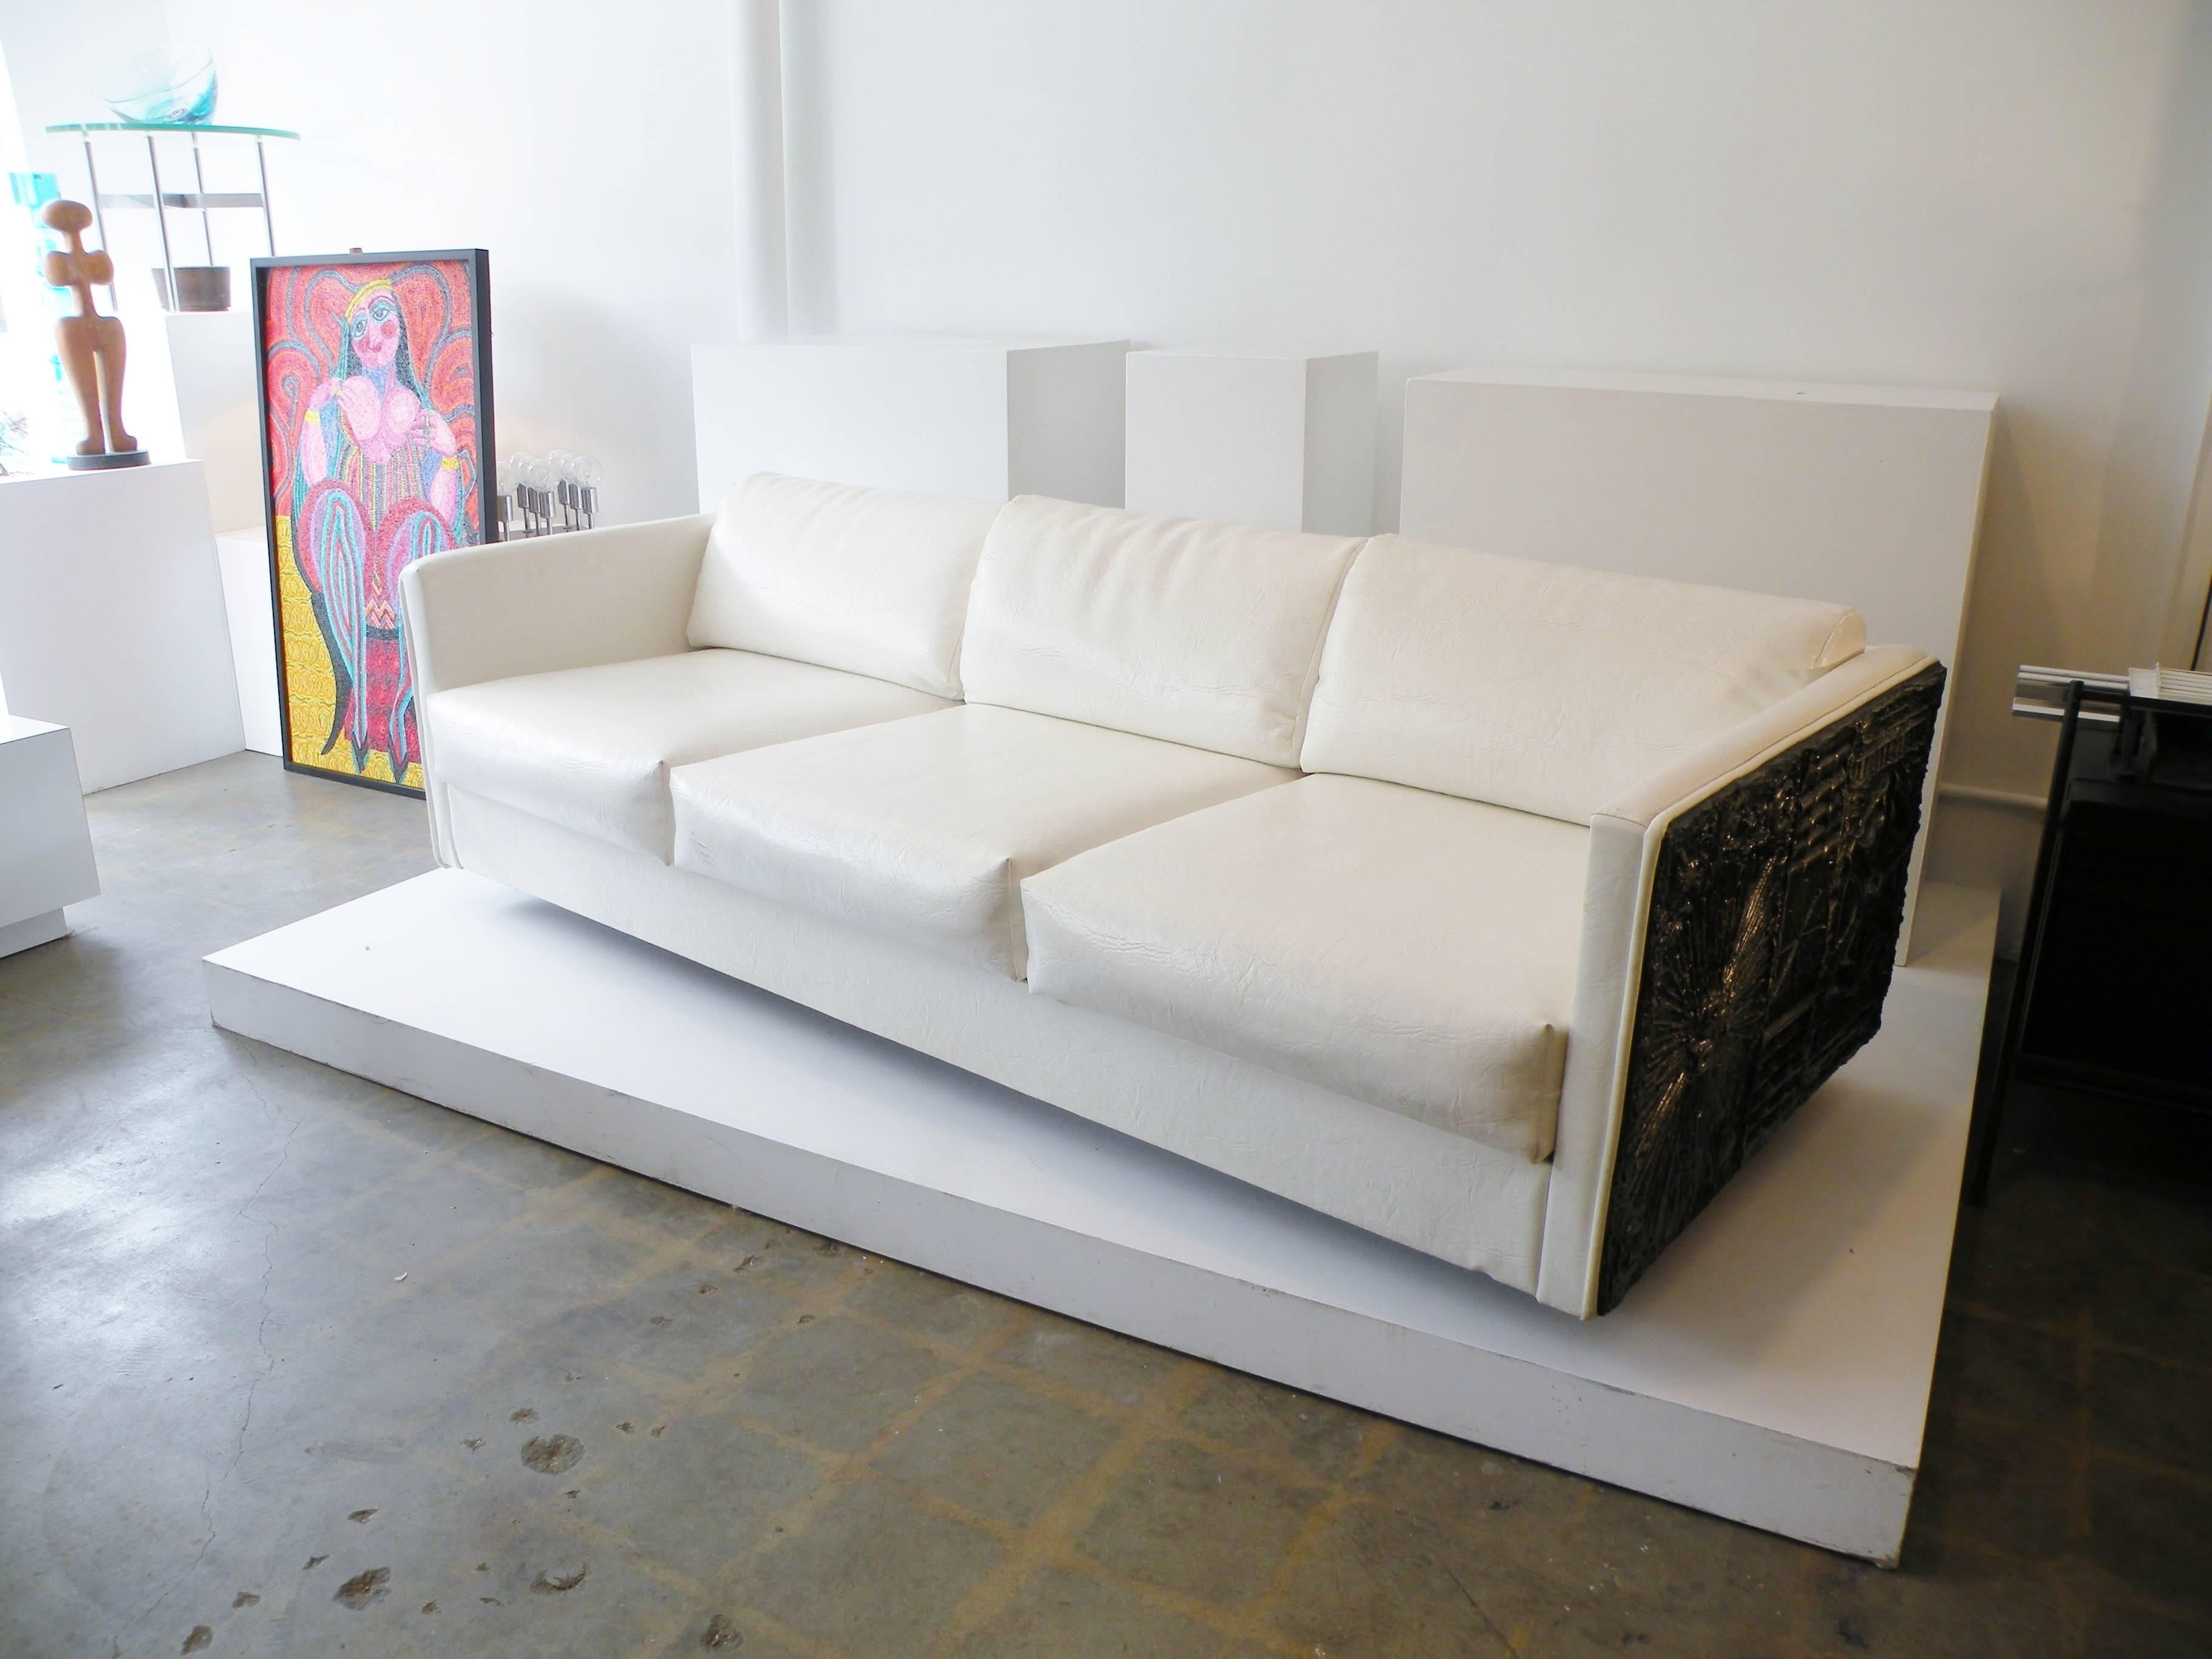 Adrian Pearsall for his Craft Associates Furniture company tuxedo arm three seat sofa. An Brutalist abstract cast panel to each side and upholstered back. With original man made off-white textured leather upholstery.